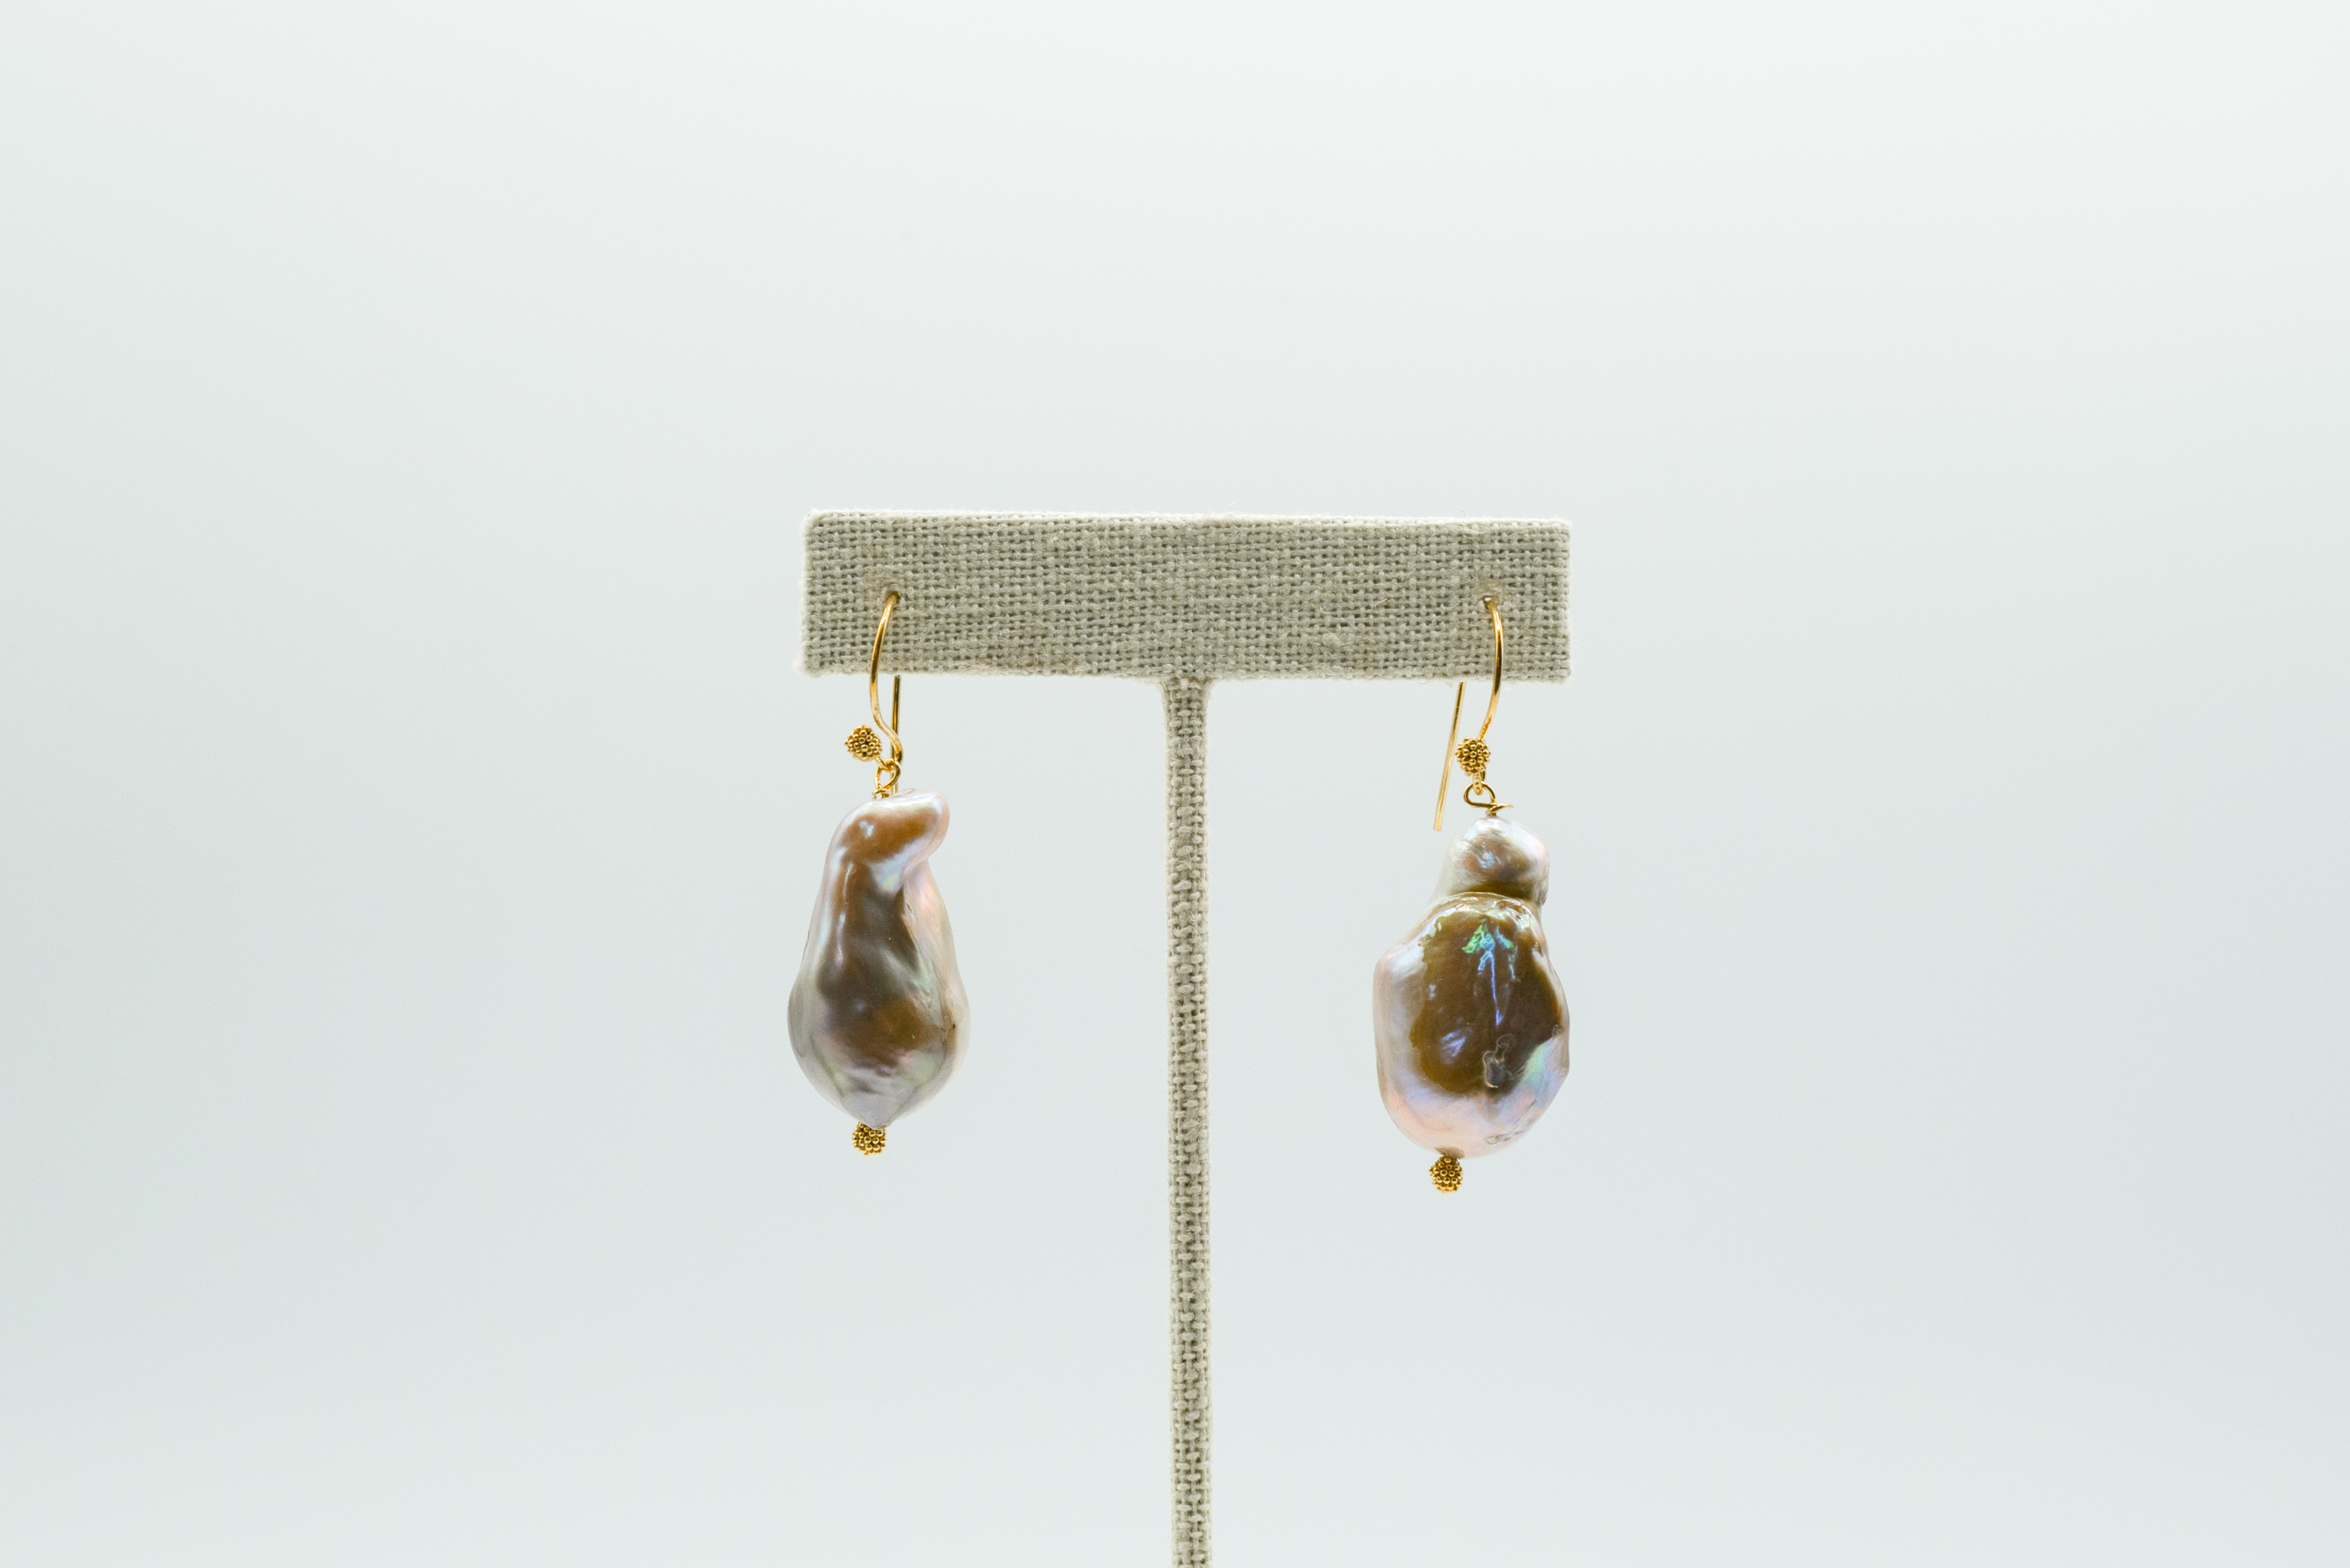 Jumbo Pink/Violet Natrual Color with Granulated Sheperd Hook and Ball (14k gold filled) matching earrings for 22057